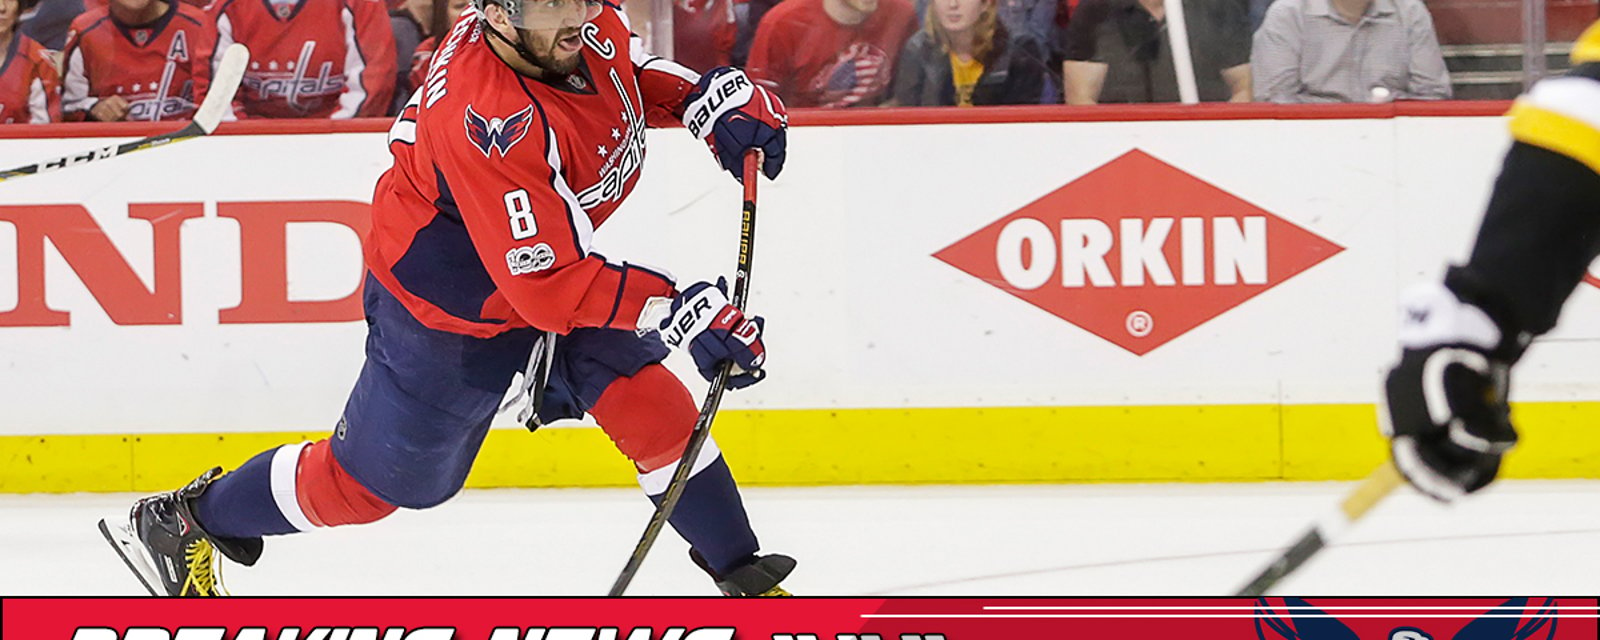 REPORT: Teammate defends Ovechkin after reports of intentionally injuring opponent